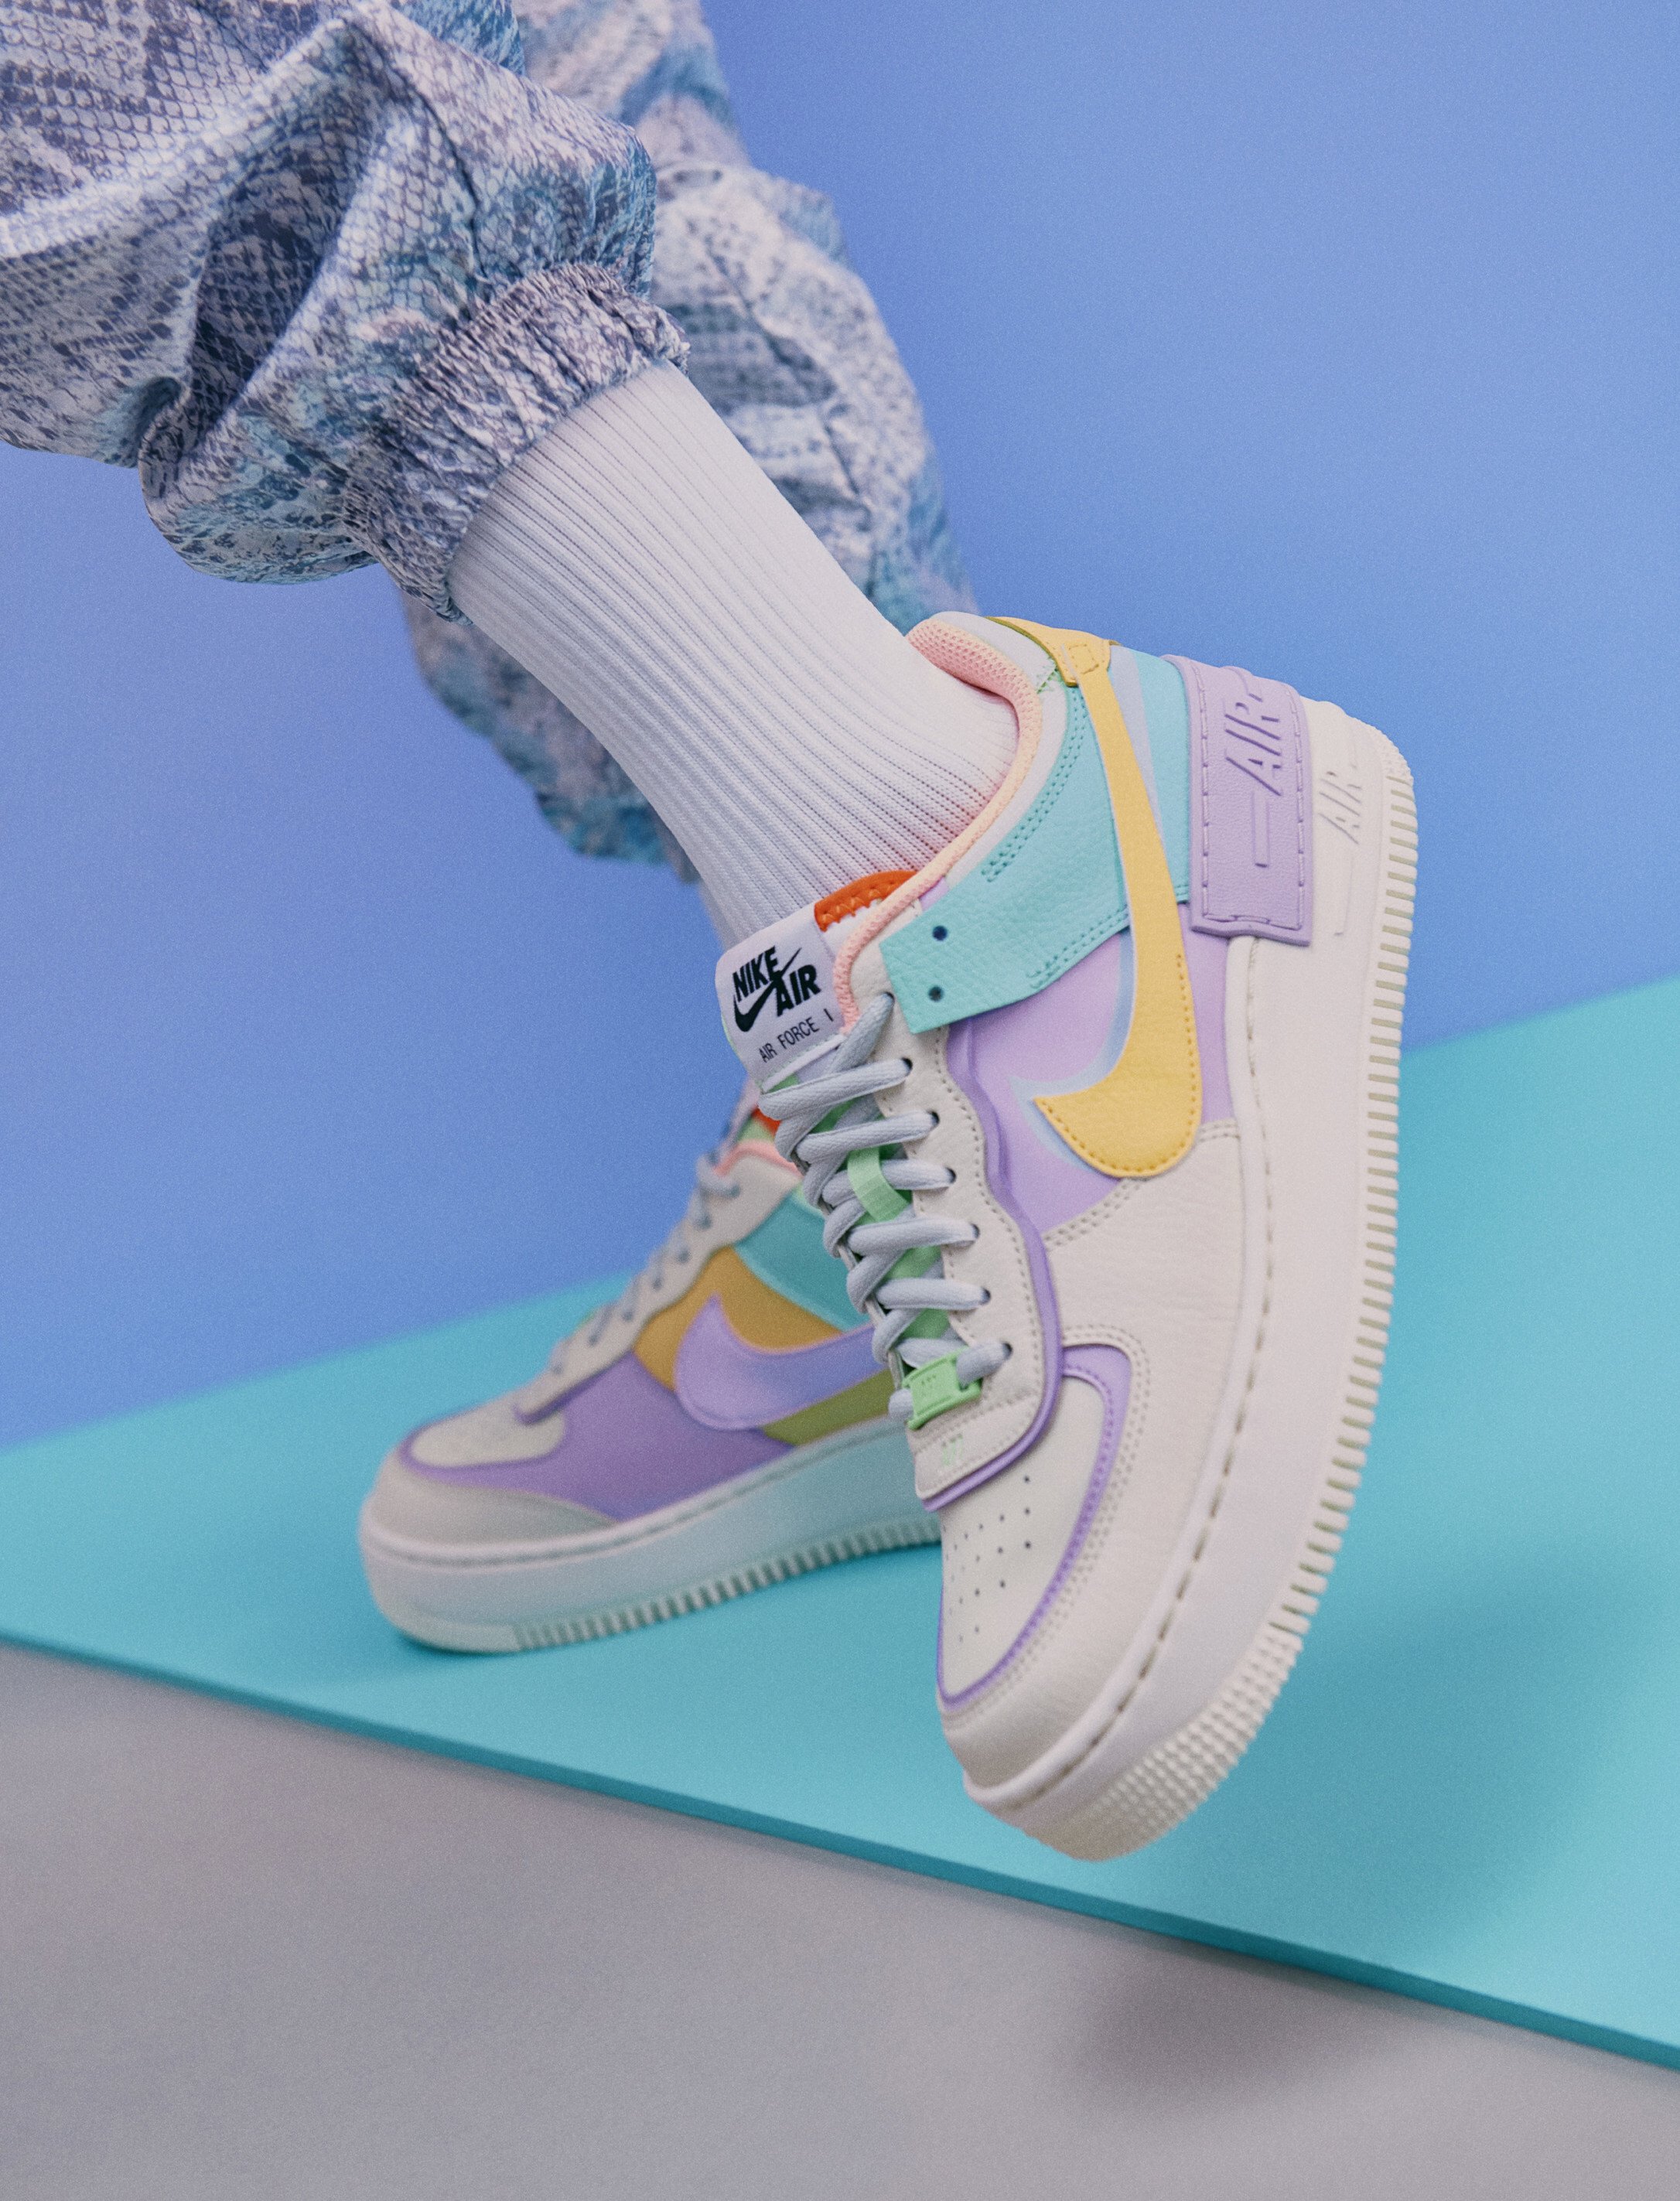 Over 2,000 versions of the Nike Air Force 1 have been released since the sneaker, arguably the world’s most popular, came out in 1982.